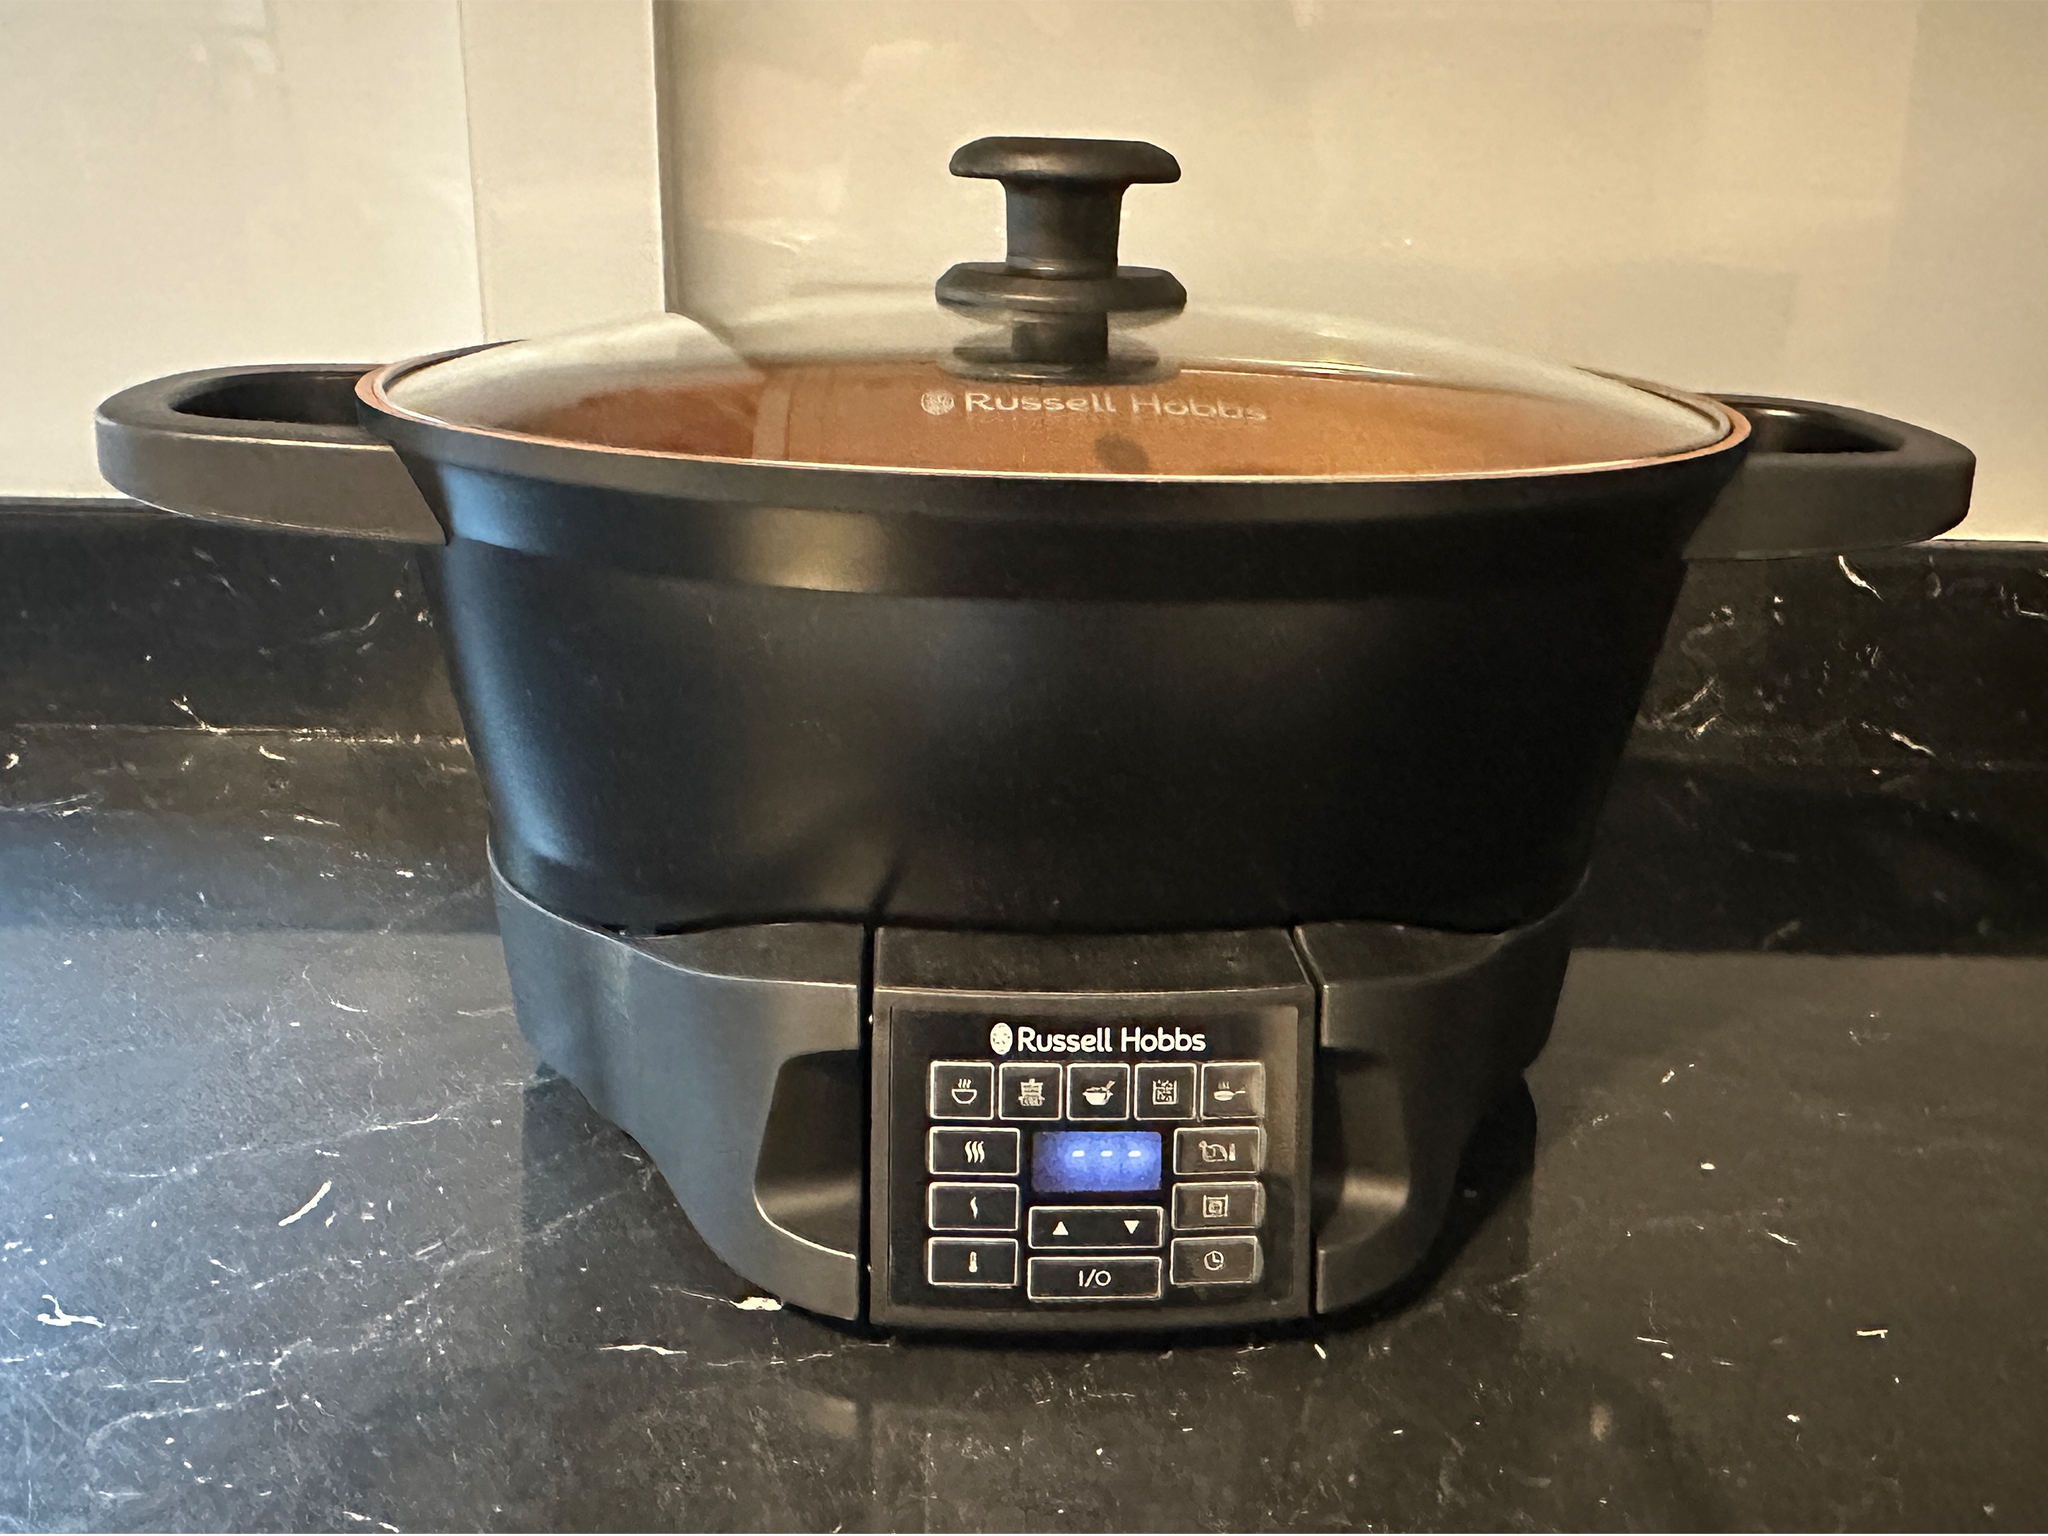 Russell Hobbs good to go multi-cooker